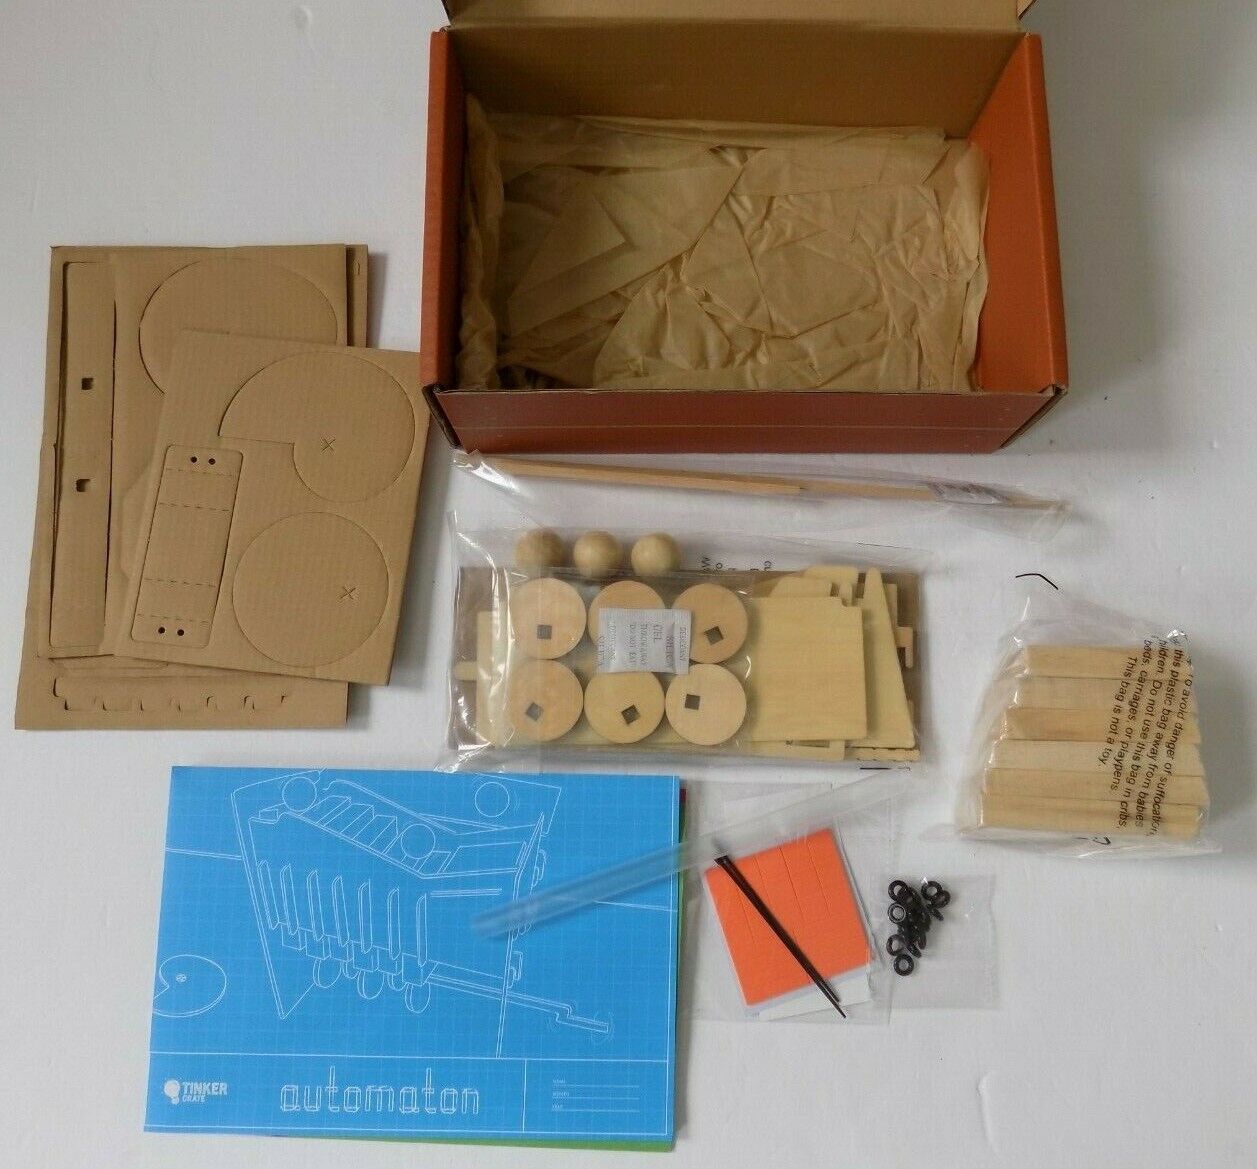 NEW Make Your Own Wooden Automaton 登場大人気アイテム Kiwi-Crate Kit Craft 【限定販売】 Tinker K